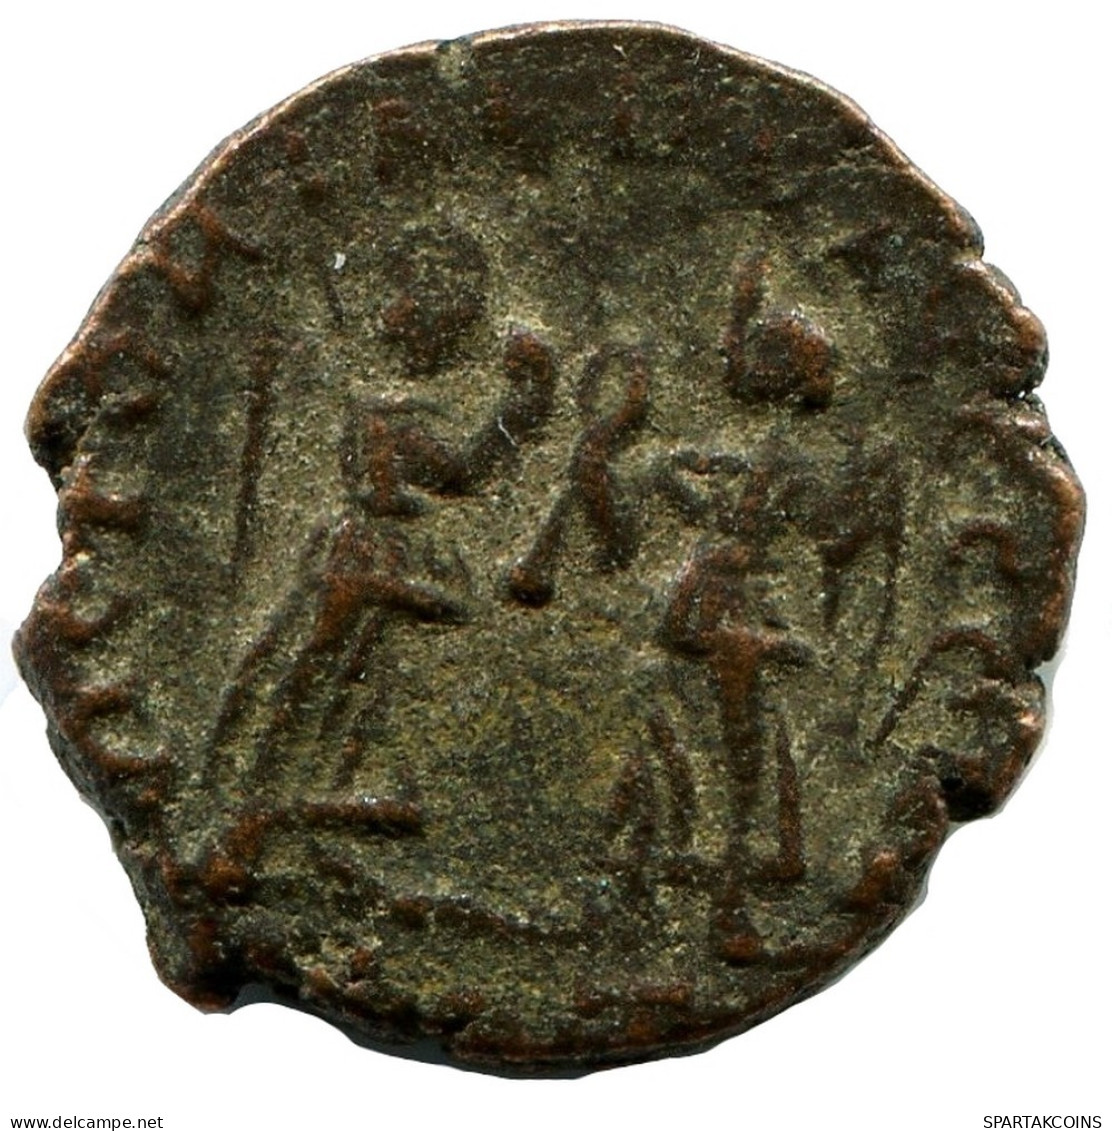 CONSTANS MINTED IN ROME ITALY FOUND IN IHNASYAH HOARD EGYPT #ANC11519.14.E.A - The Christian Empire (307 AD Tot 363 AD)